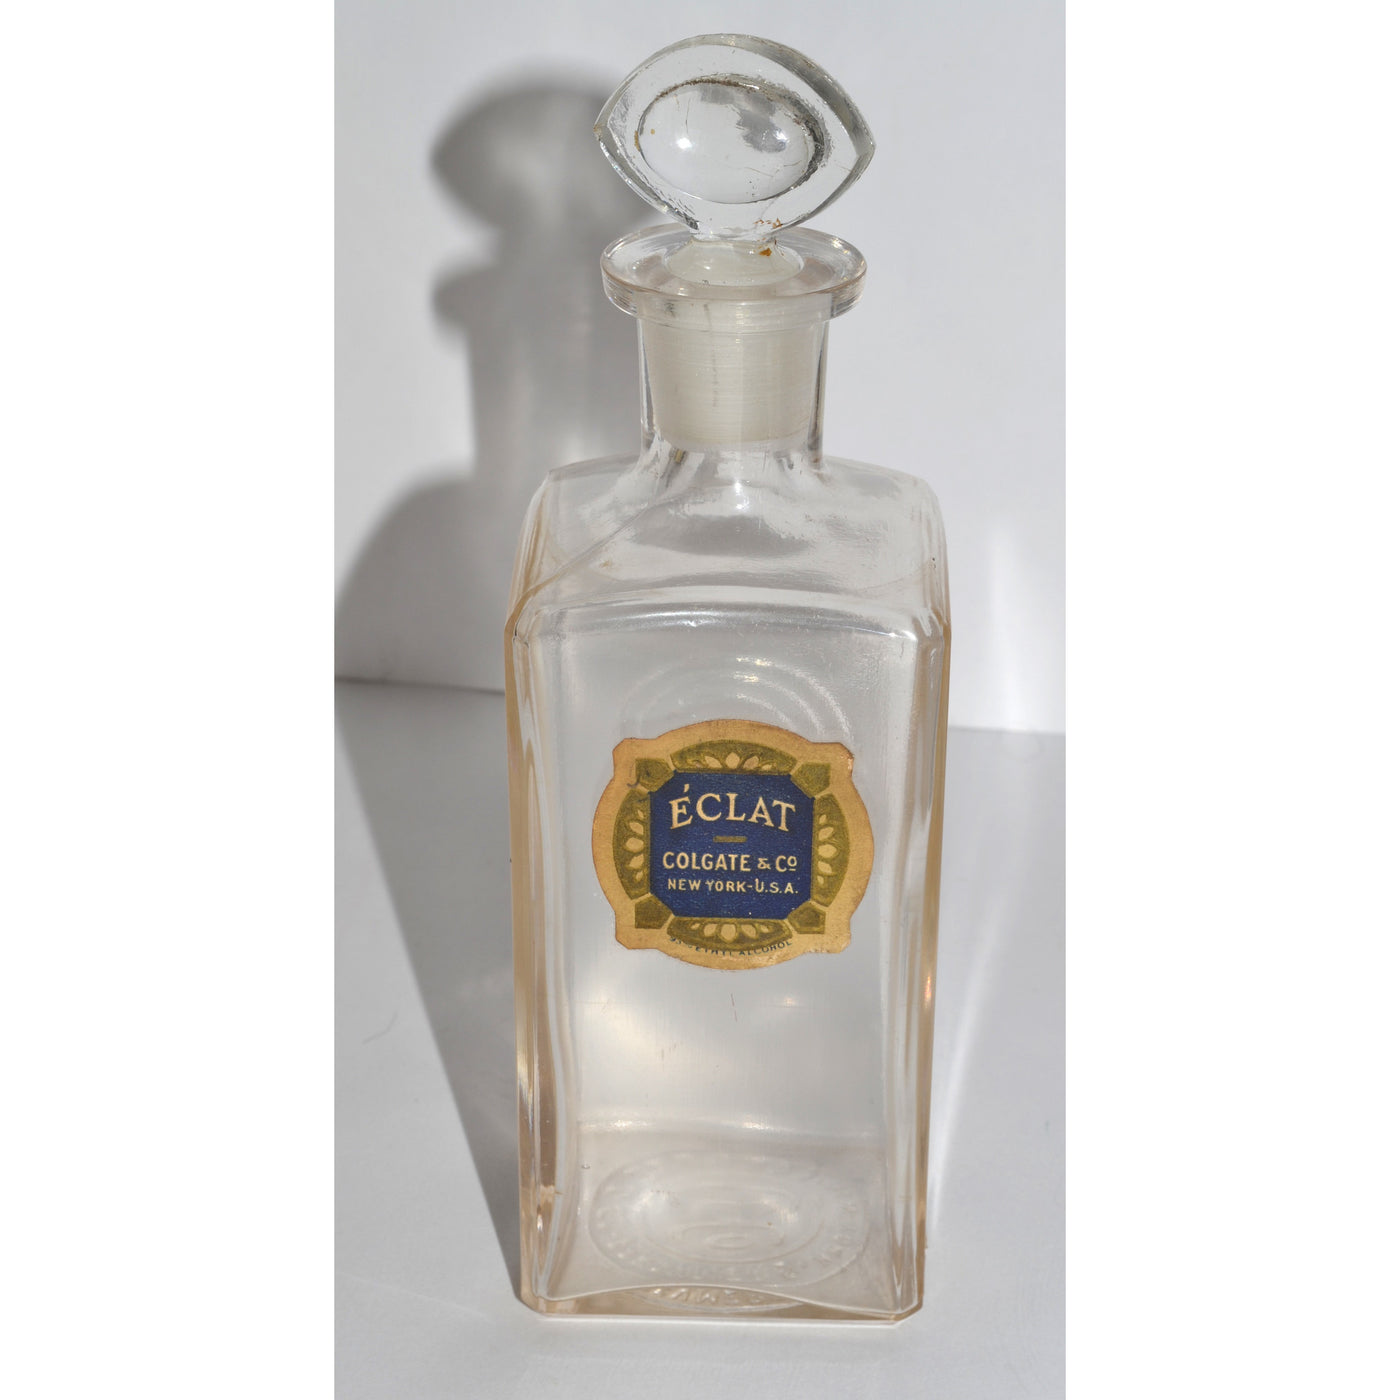 Antique Eclat Apothecary Bottle By Colgate & Co. 